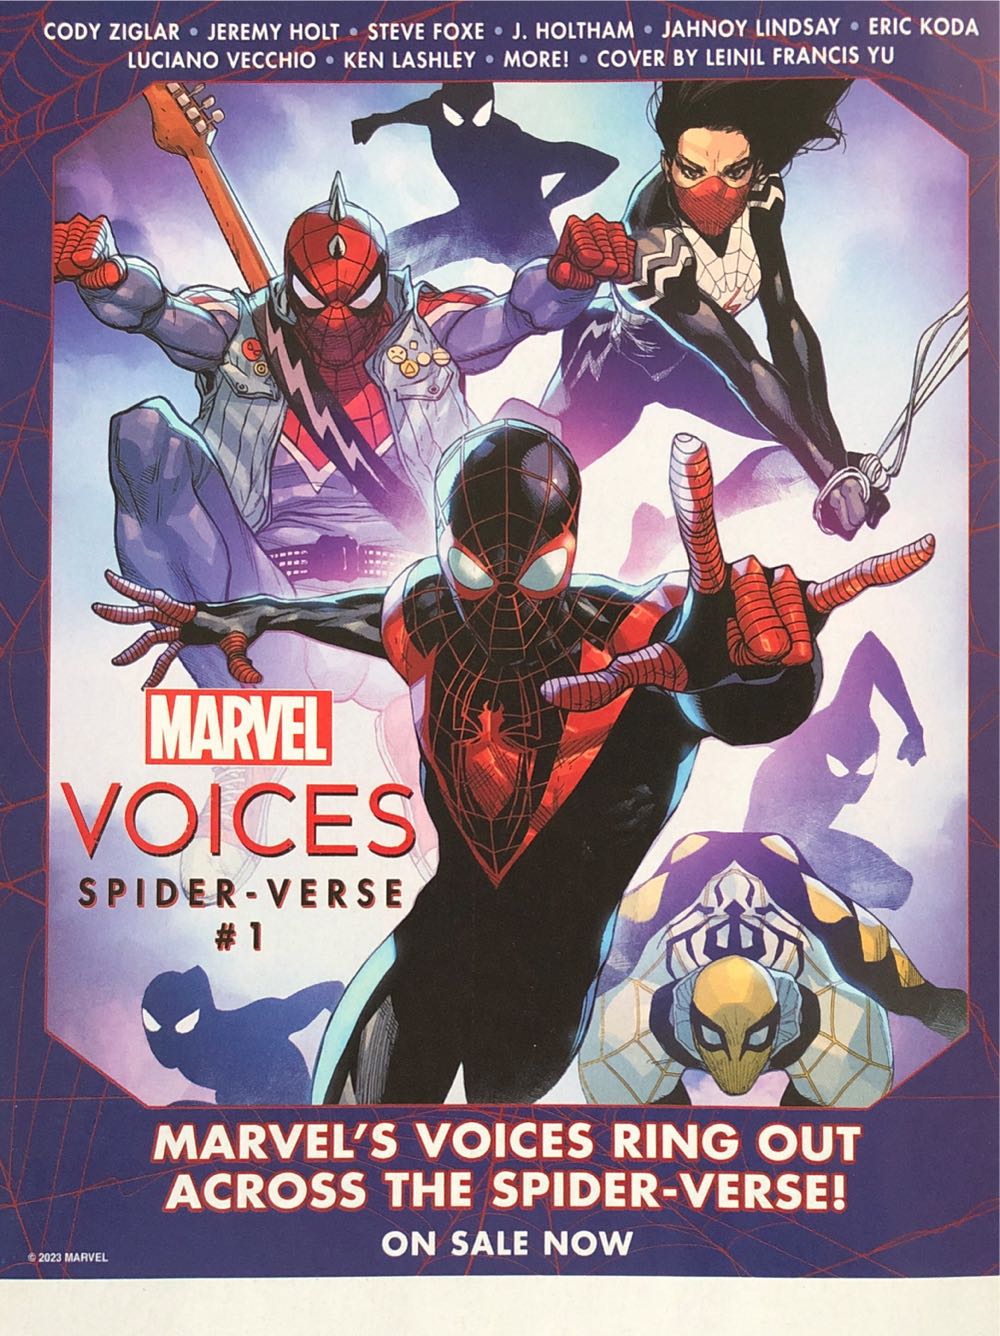 FCBD: Marvel Voices - Marvel Comics (1 - May 2023) comic book collectible [Barcode 75960620621600111] - Main Image 4